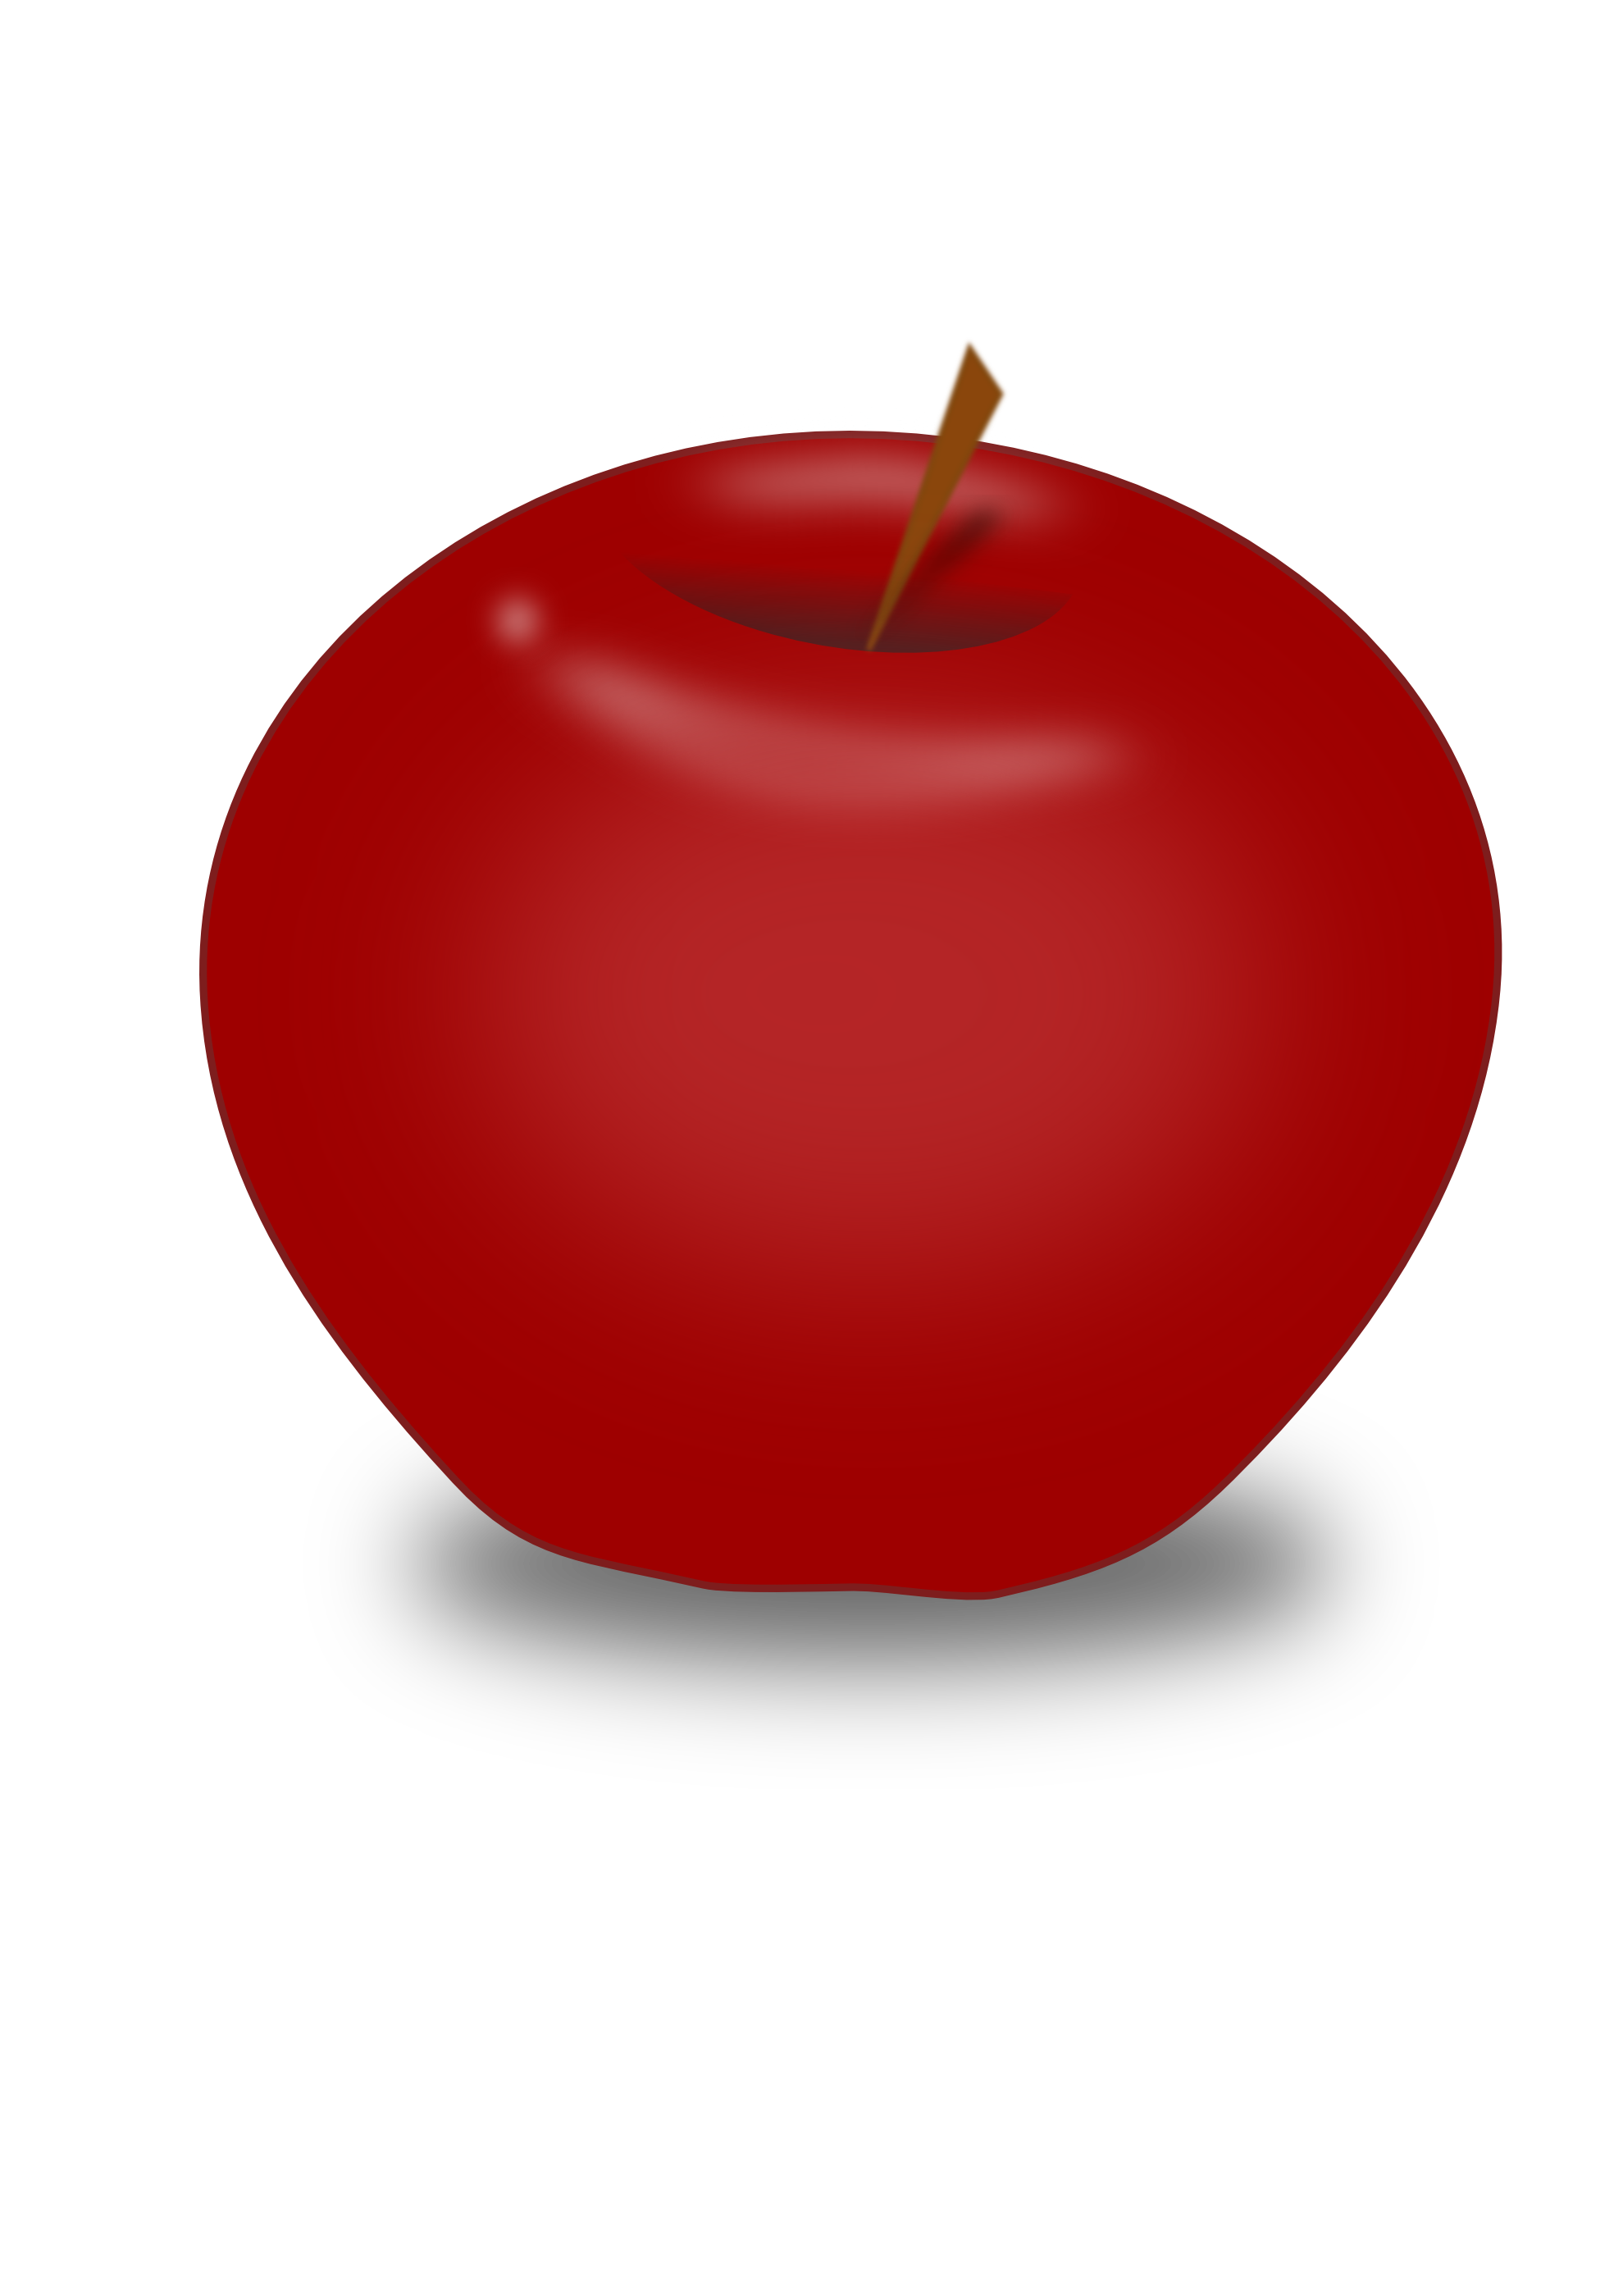 Red apple PNG